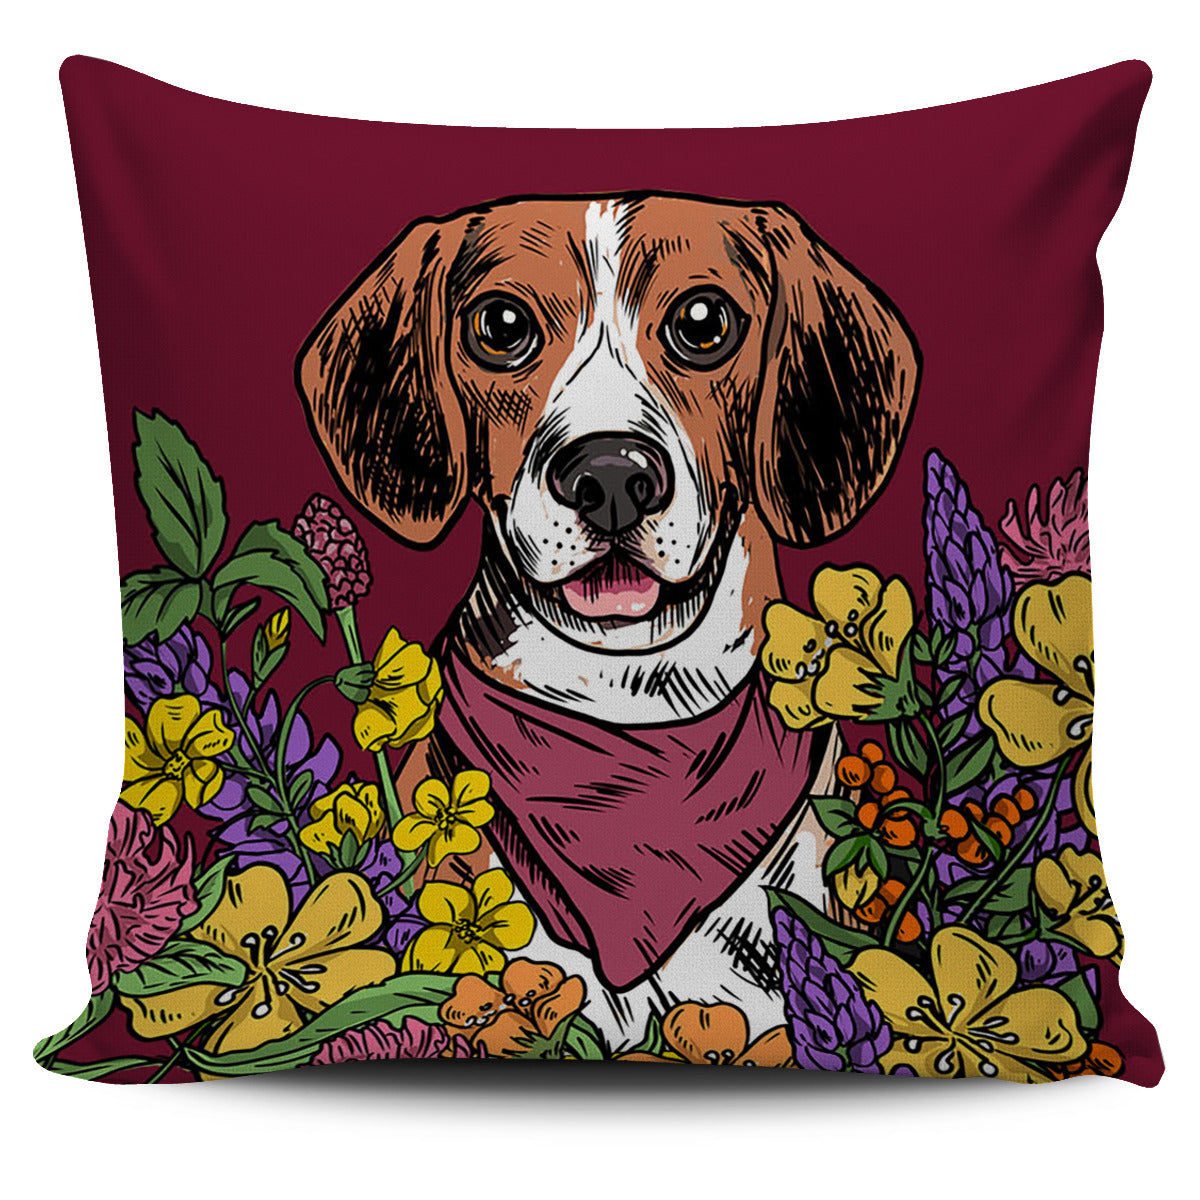 Illustrated Beagle Pillow Cover